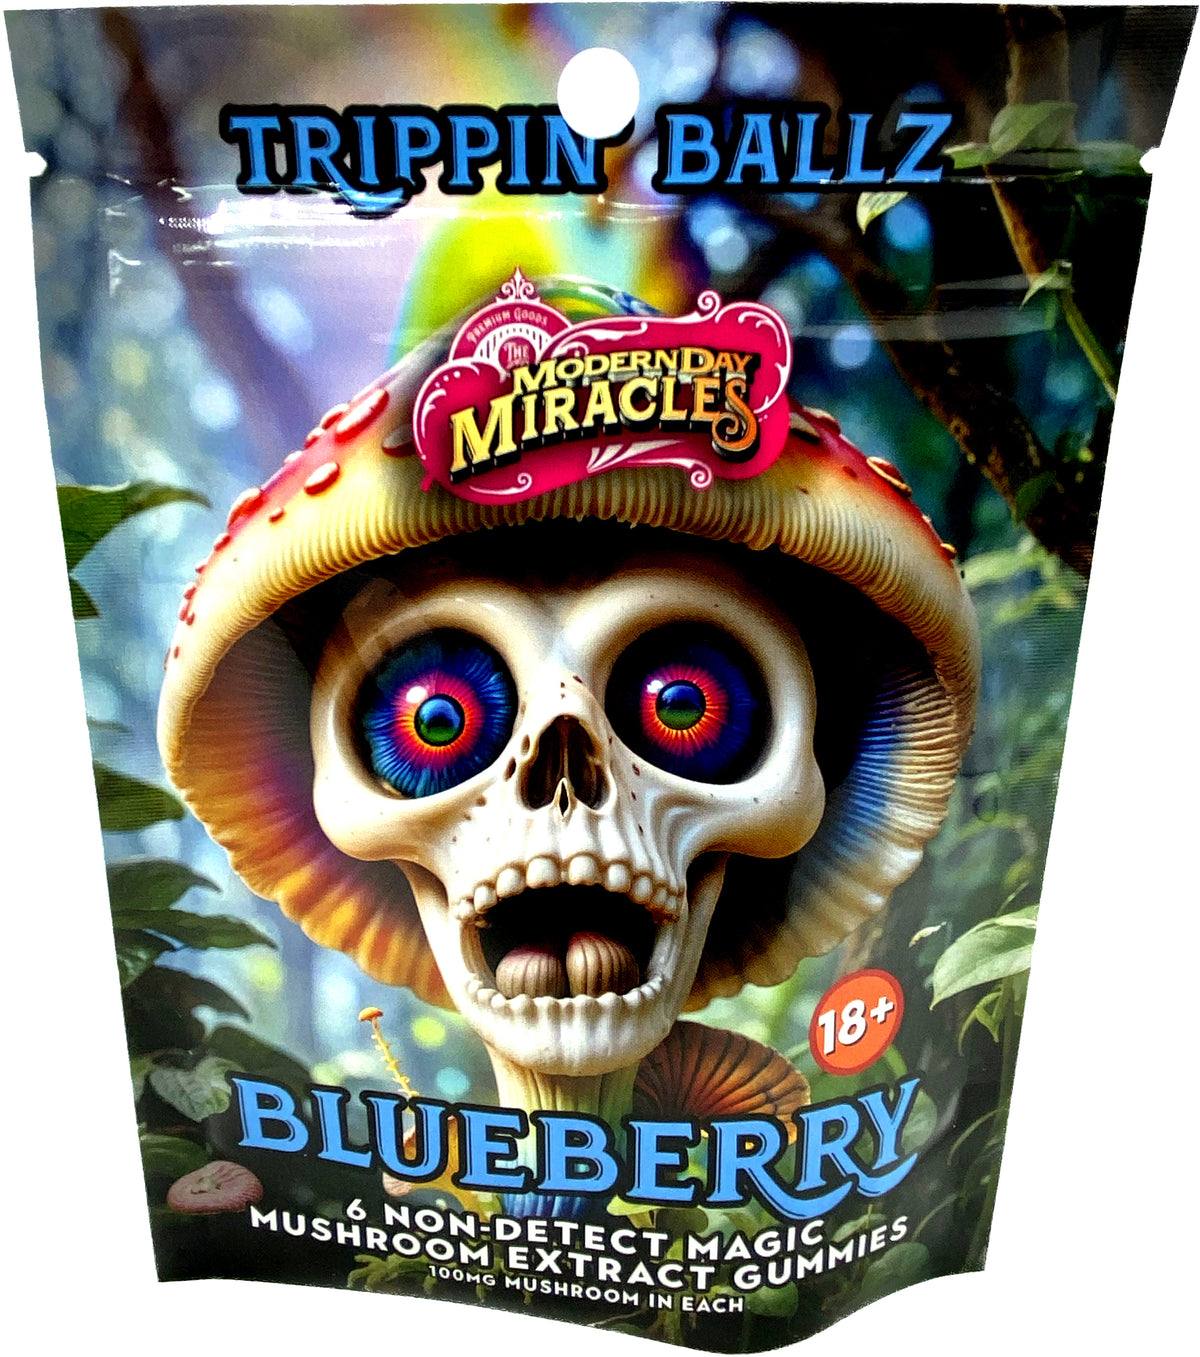 MODERN DAY MIRACLES Trippin' Ballz Non-Detect Magic Mushroom Extract Gummies 100mg 6ct Blueberry Flavored